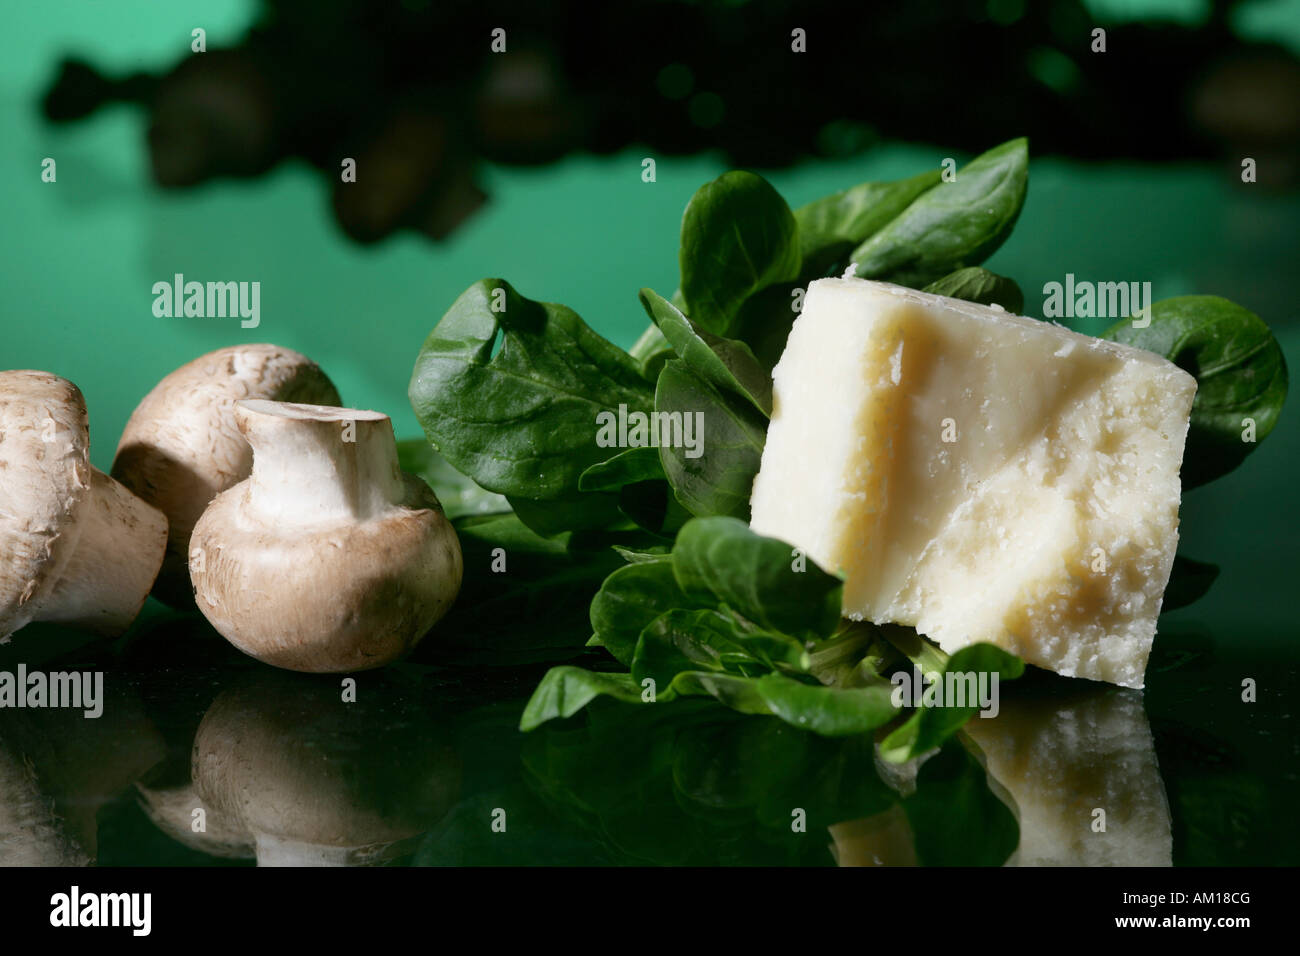 Mushrooms with Parmesan and lamb's lettuce Stock Photo